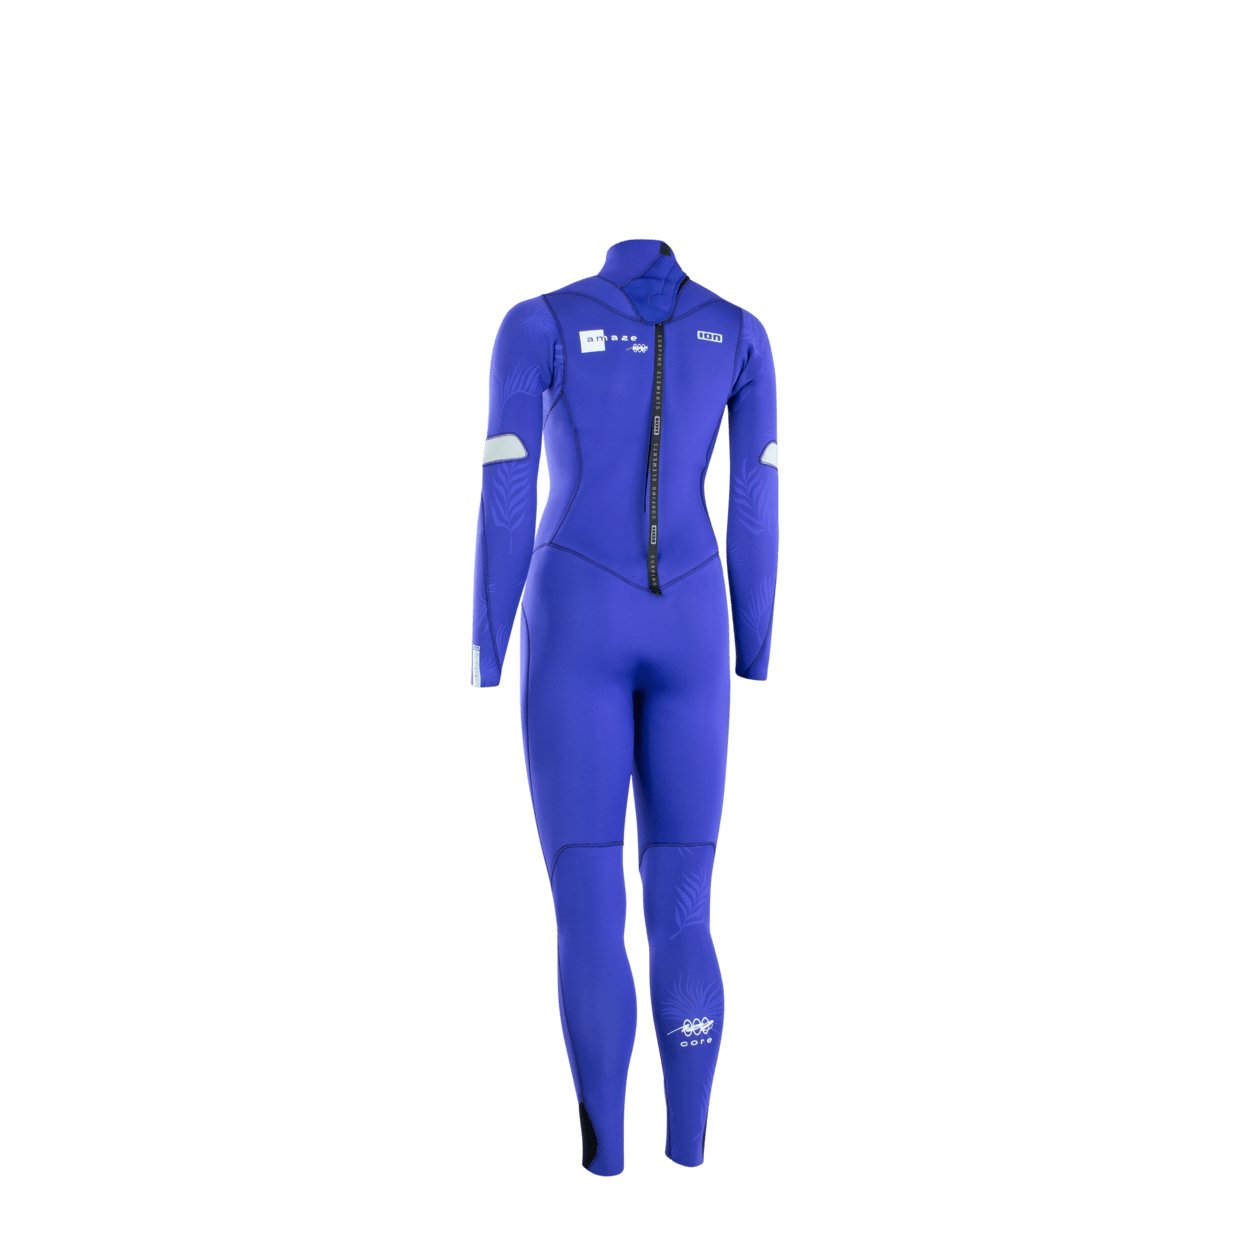 ION Women Wetsuit Amaze Core 5/4 Back Zip 2022 - Worthing Watersports - 9010583057613 - Wetsuits - ION Water